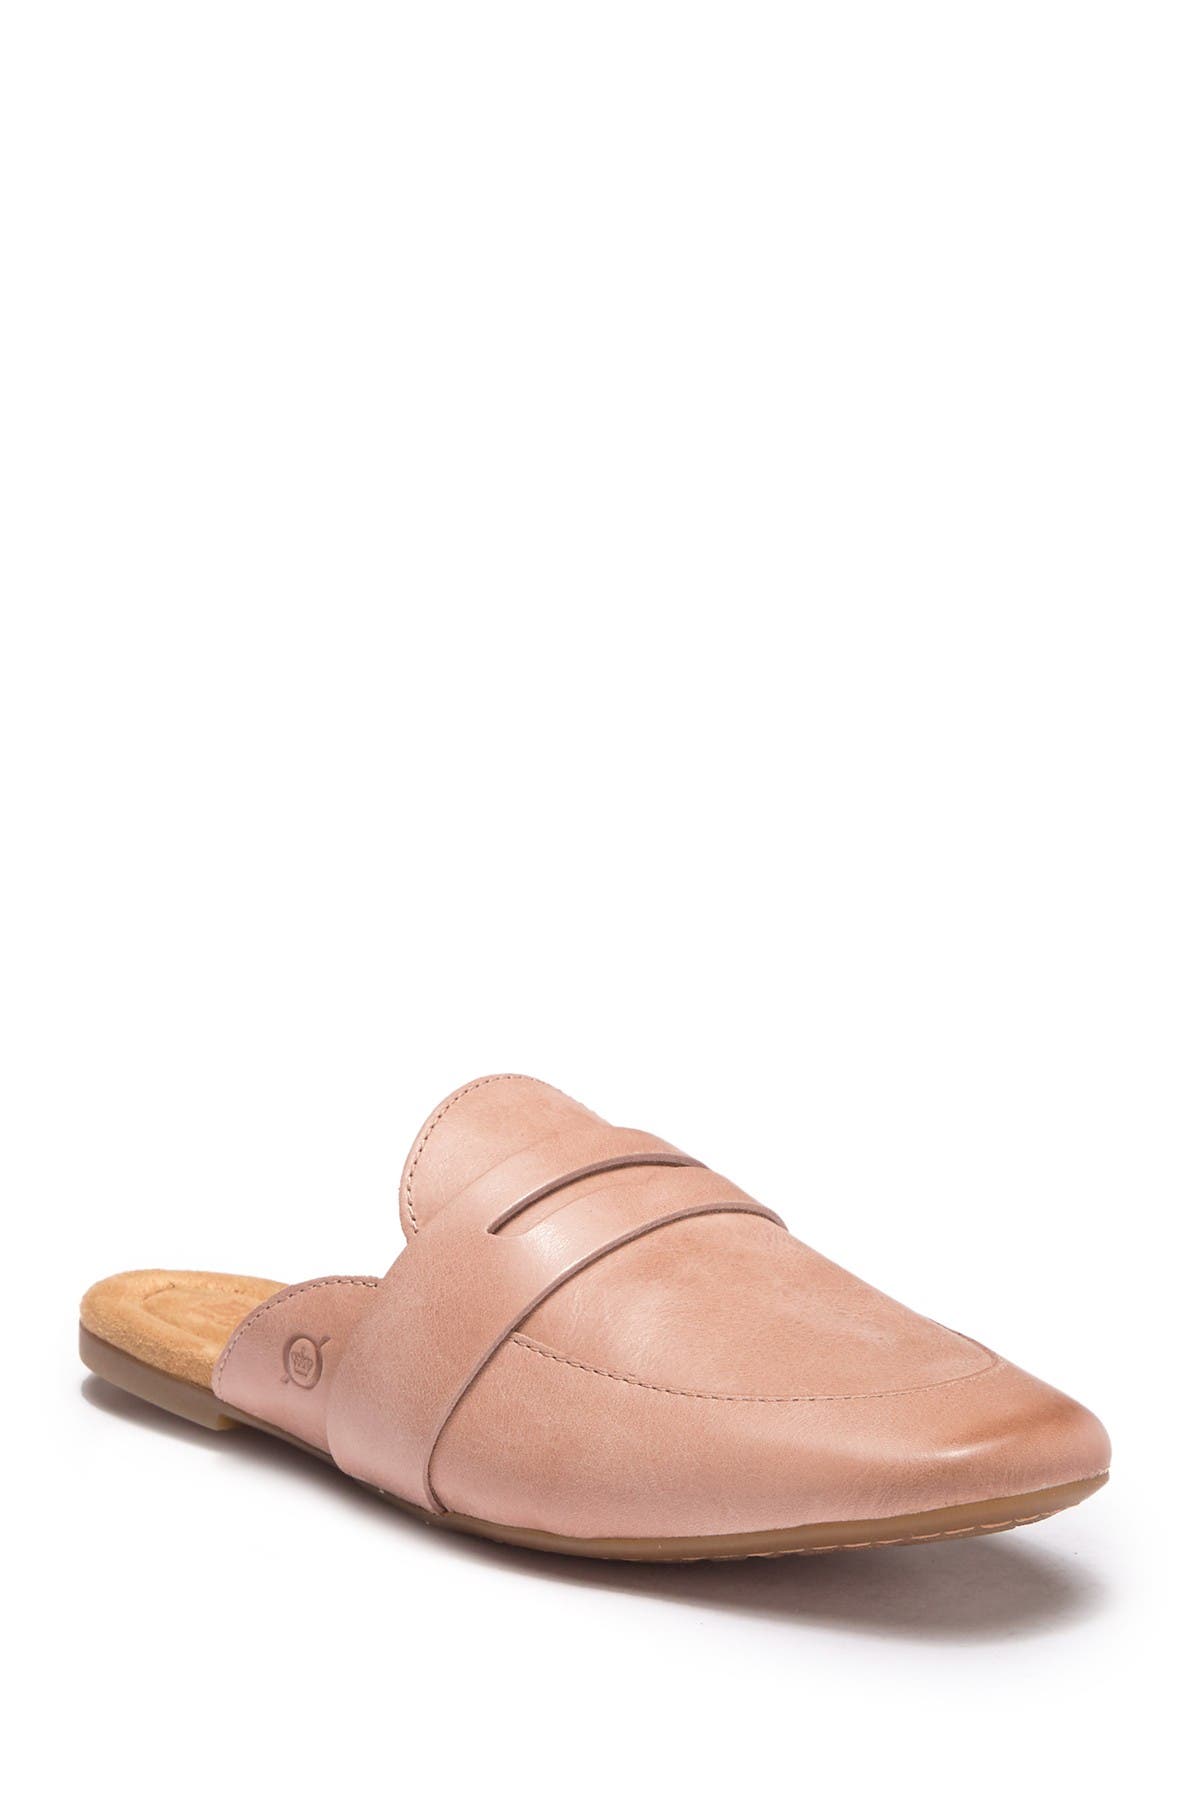 Born | Cayo Leather Penny Loafer Mule 